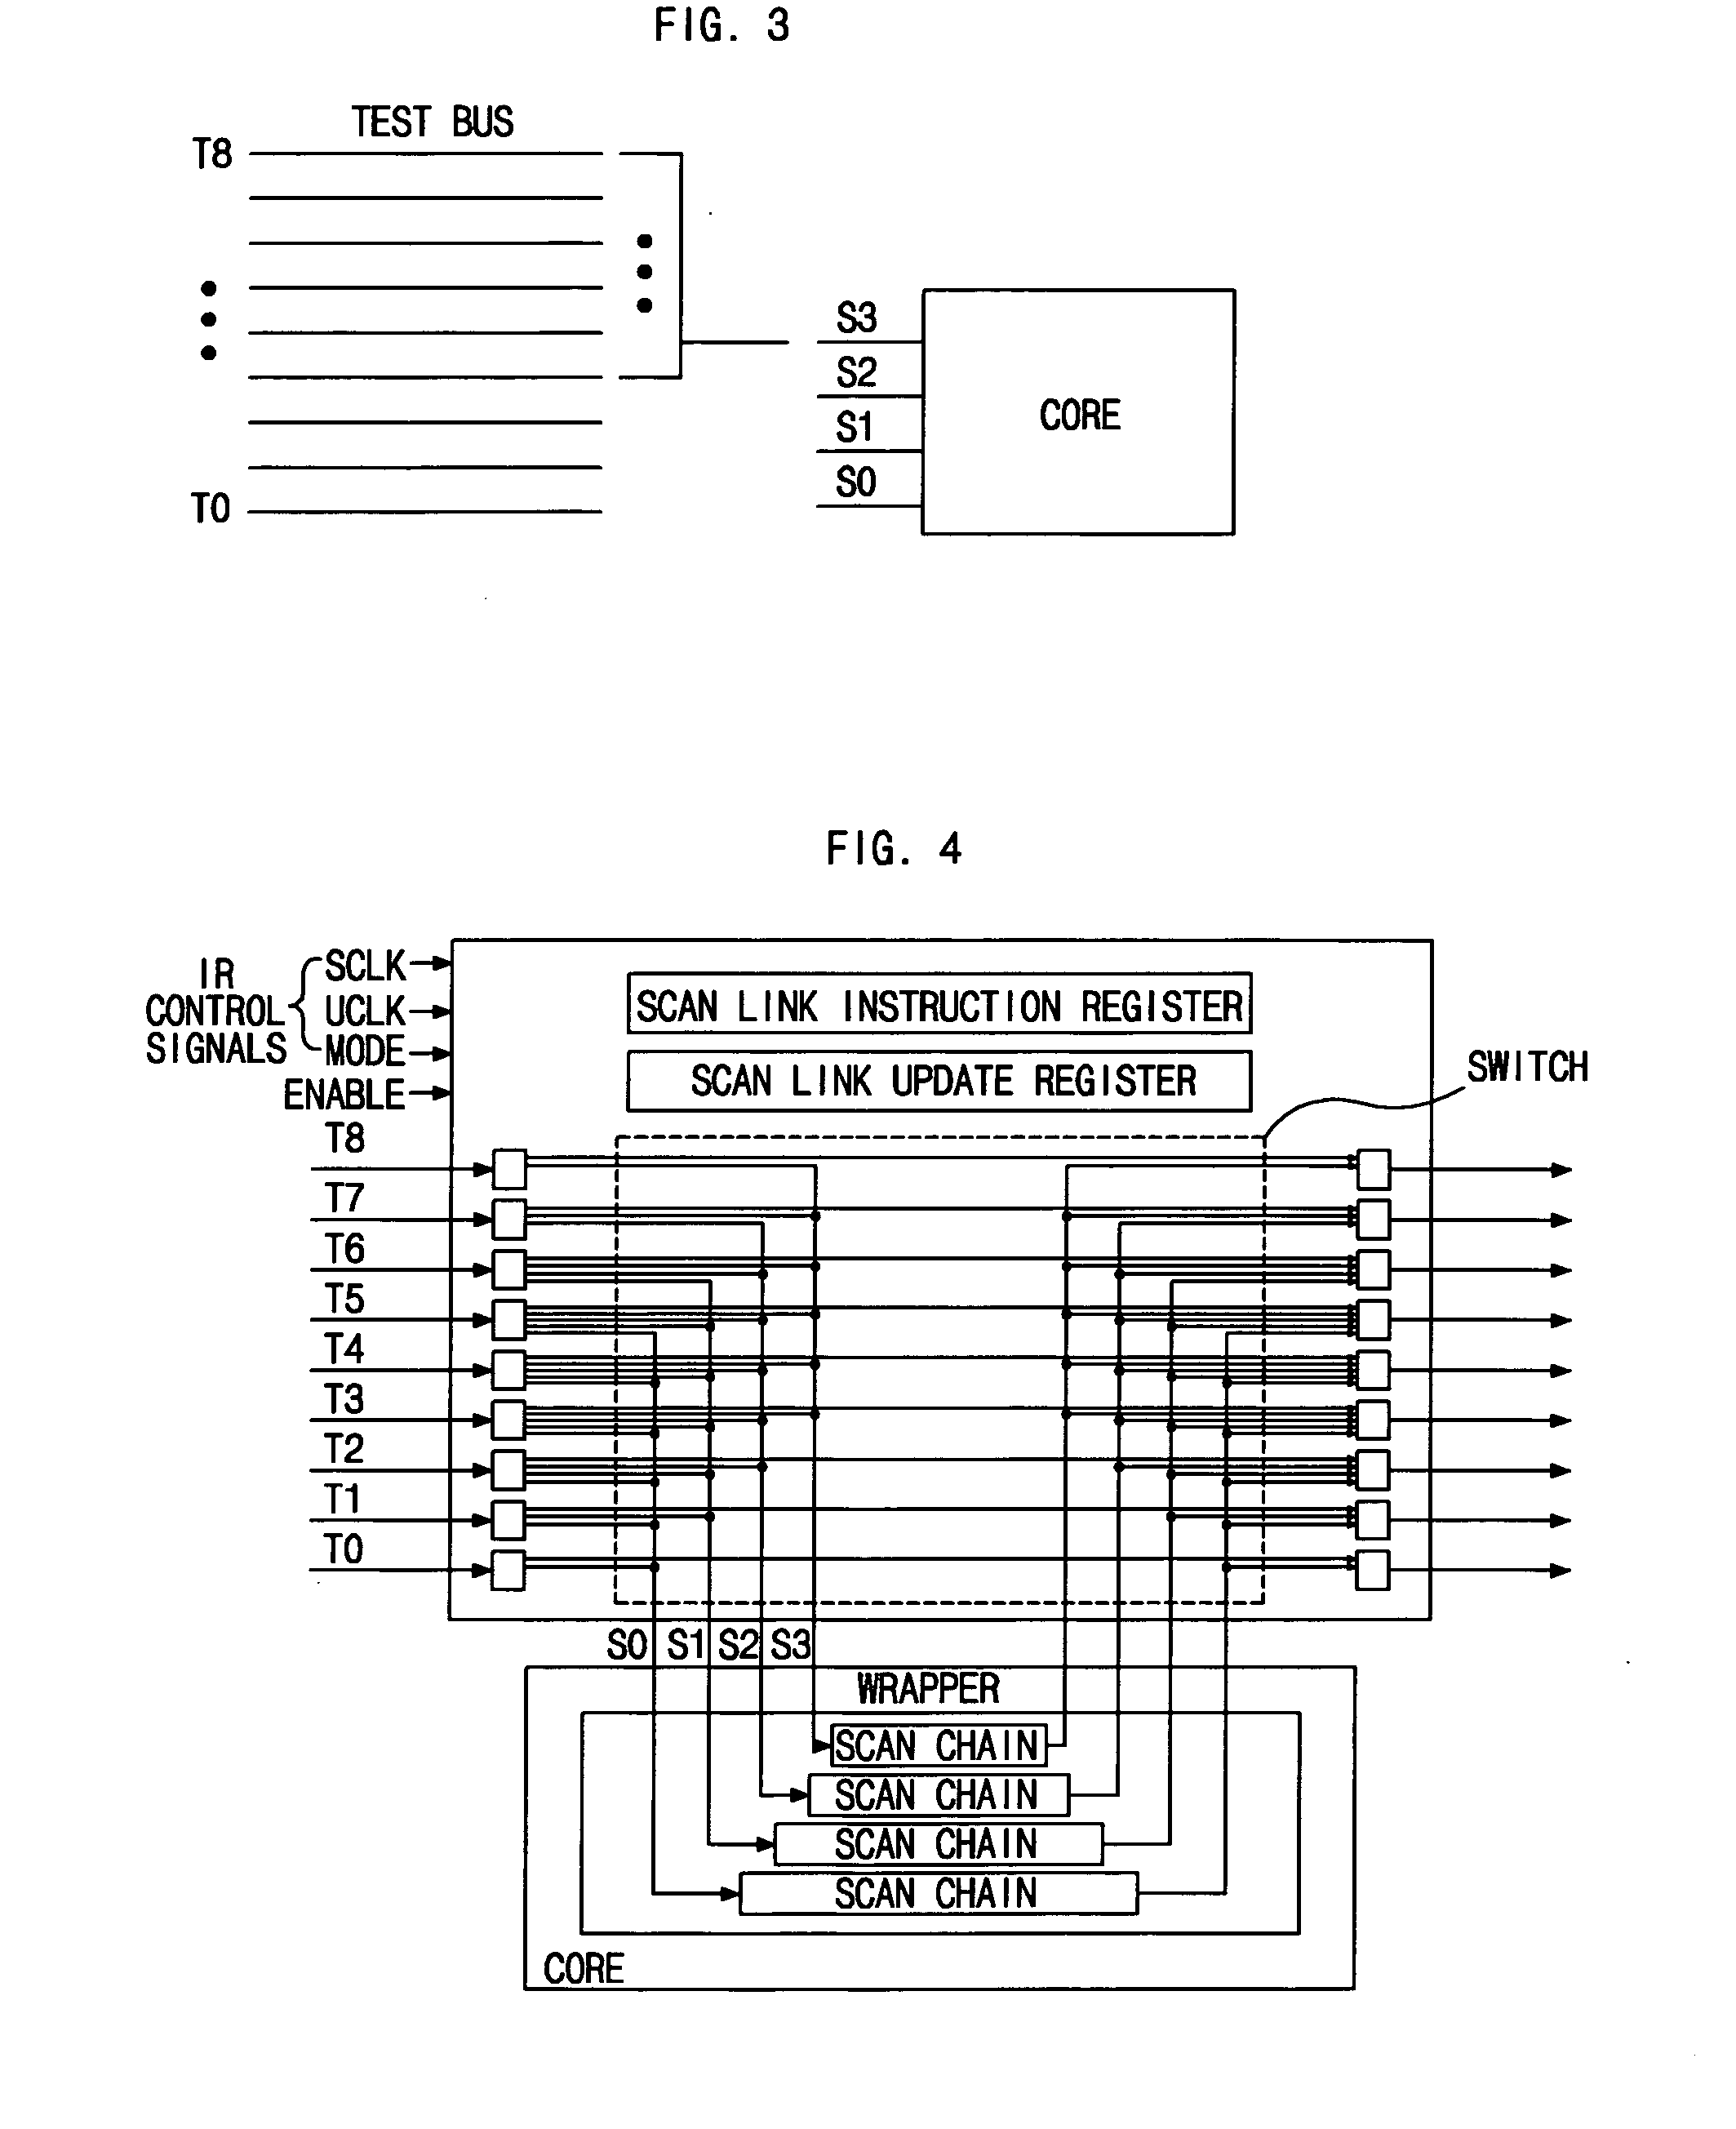 Soc-based core scan chain linkage switch